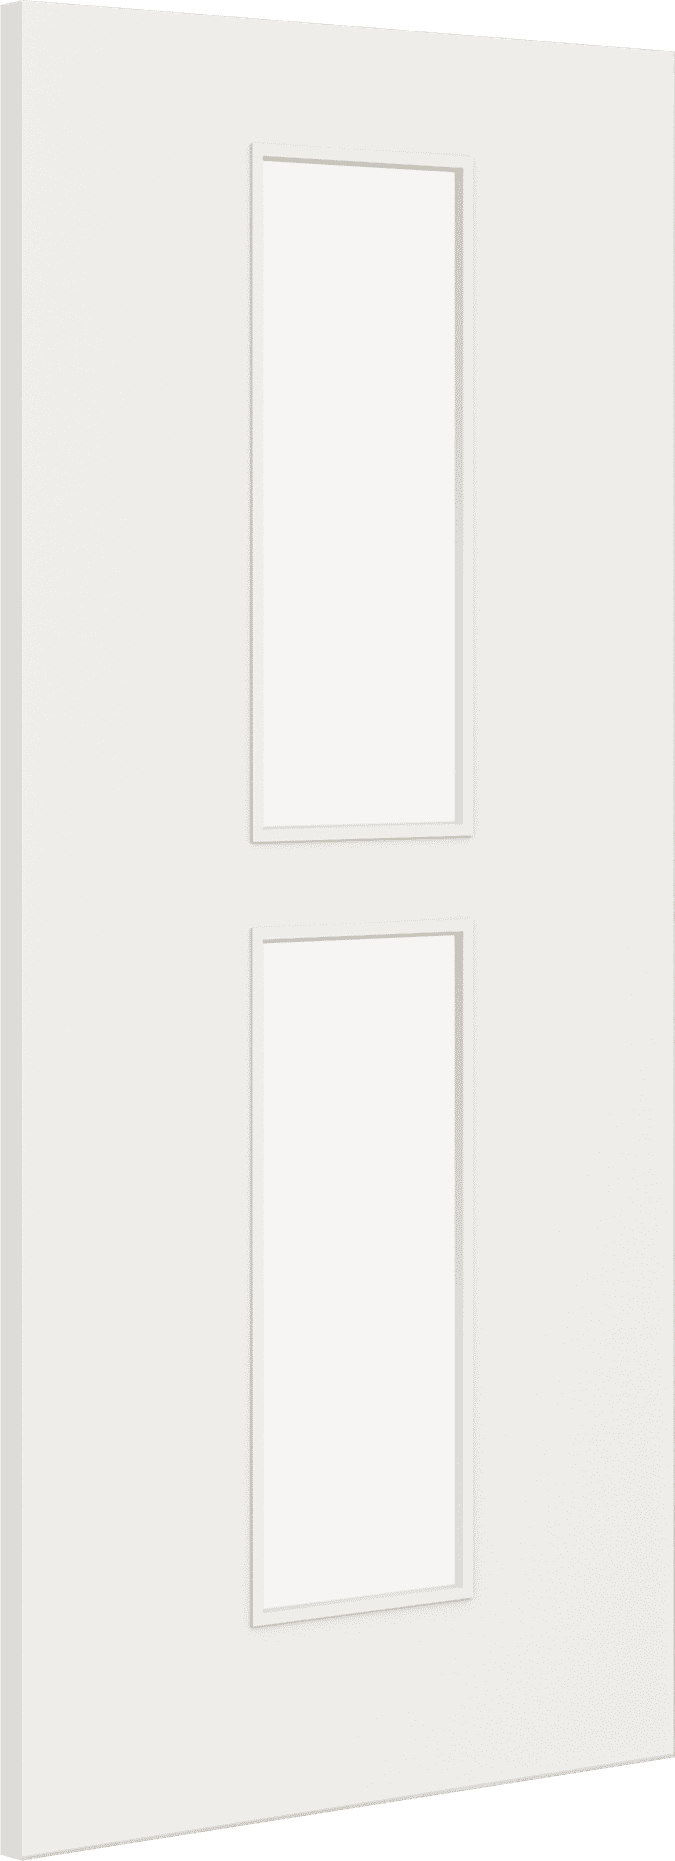 1981mm x 762mm x 44mm (30") Architectural Paint Grade White 12 Clear Glazed Fire Door Blank